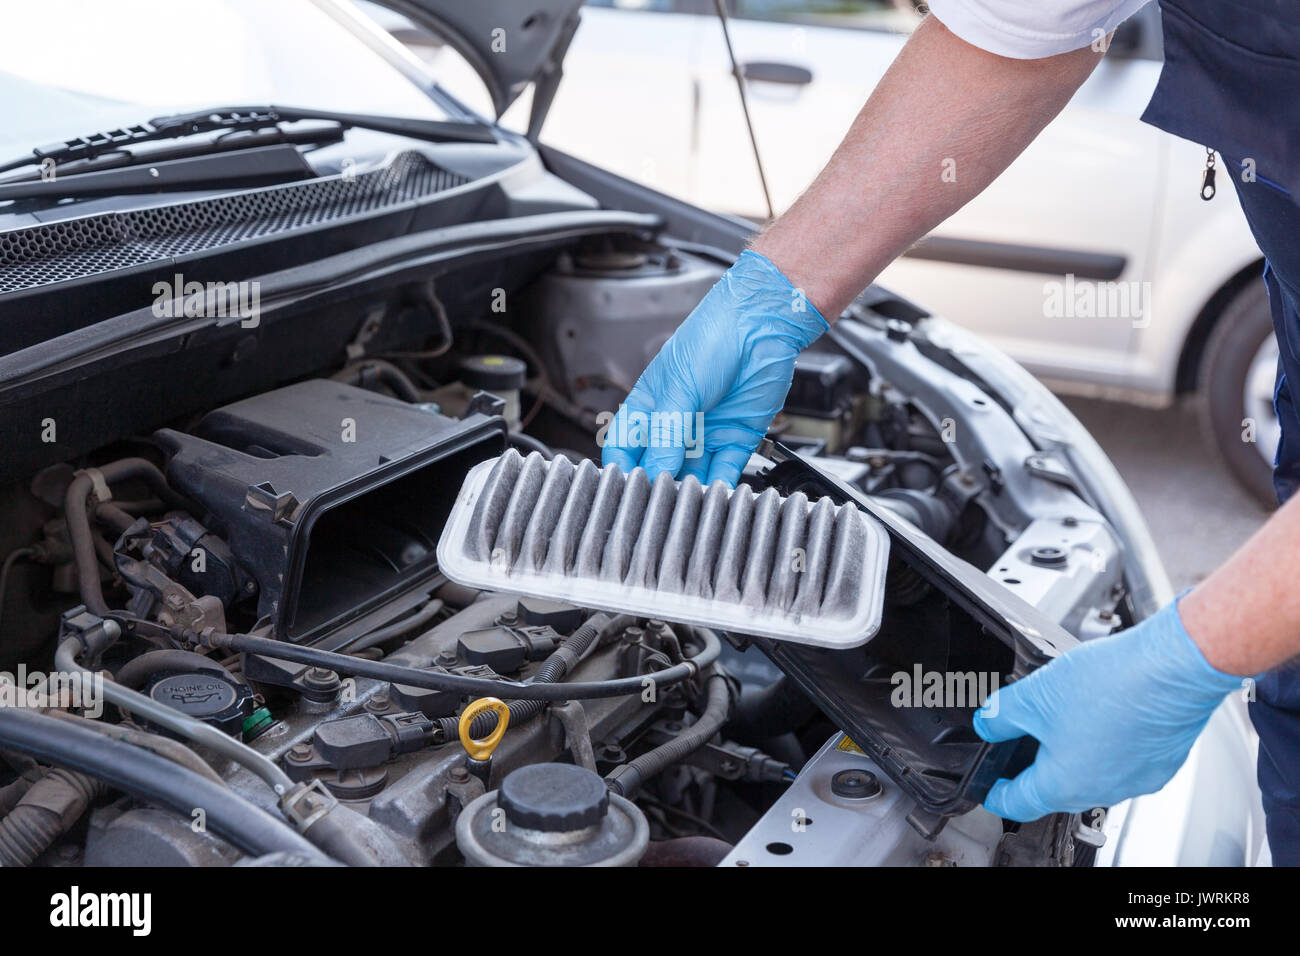 Internal combustion engine air filter Stock Photo